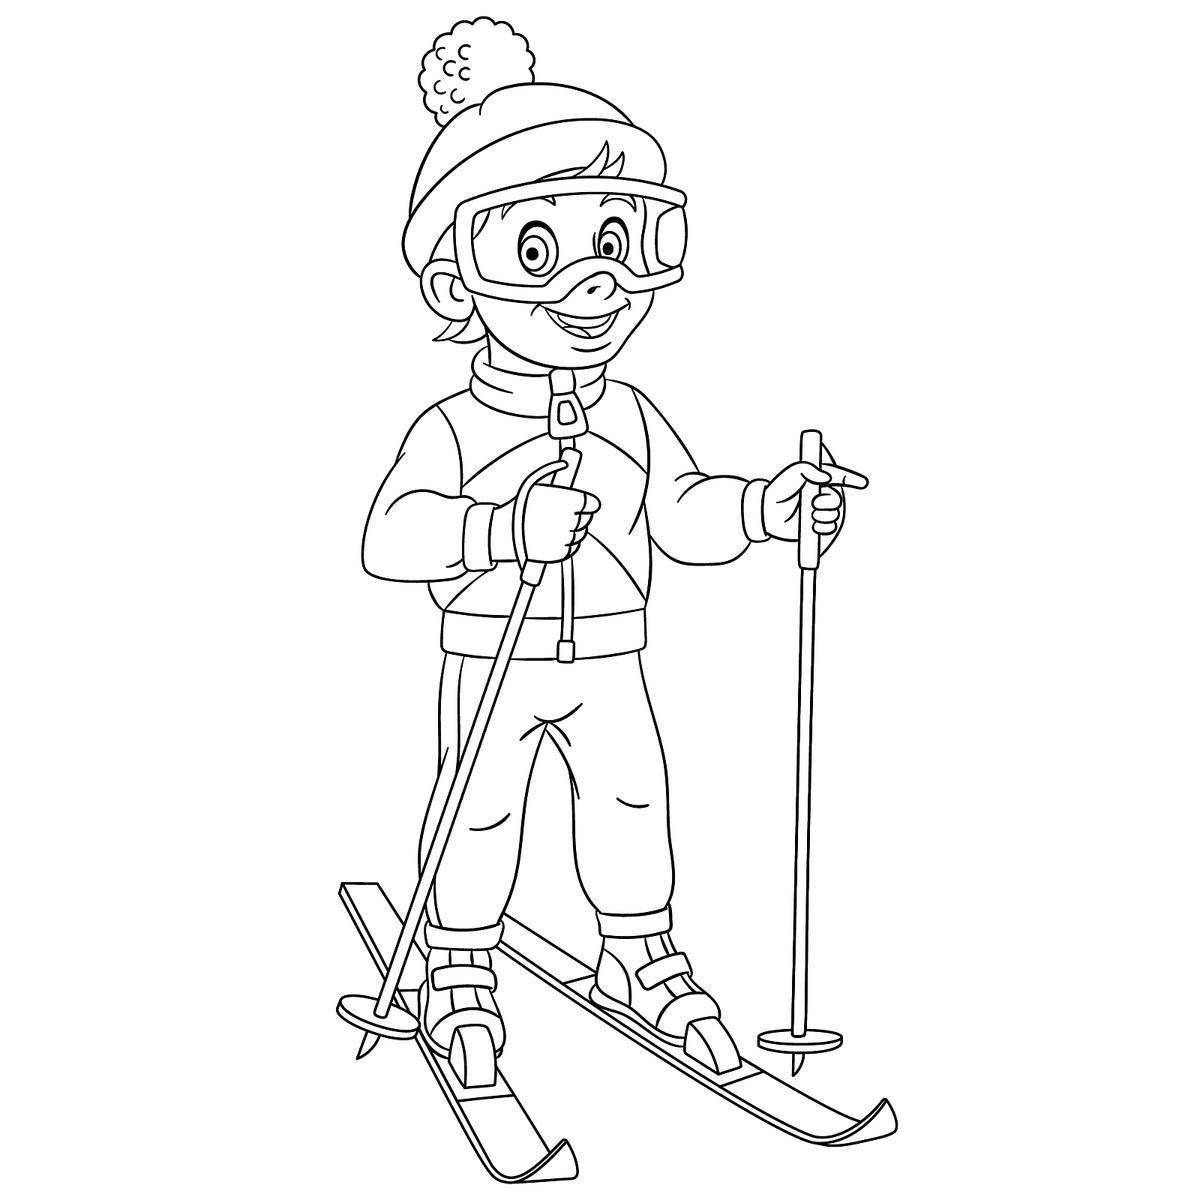 Coloring page energetic boy skiing